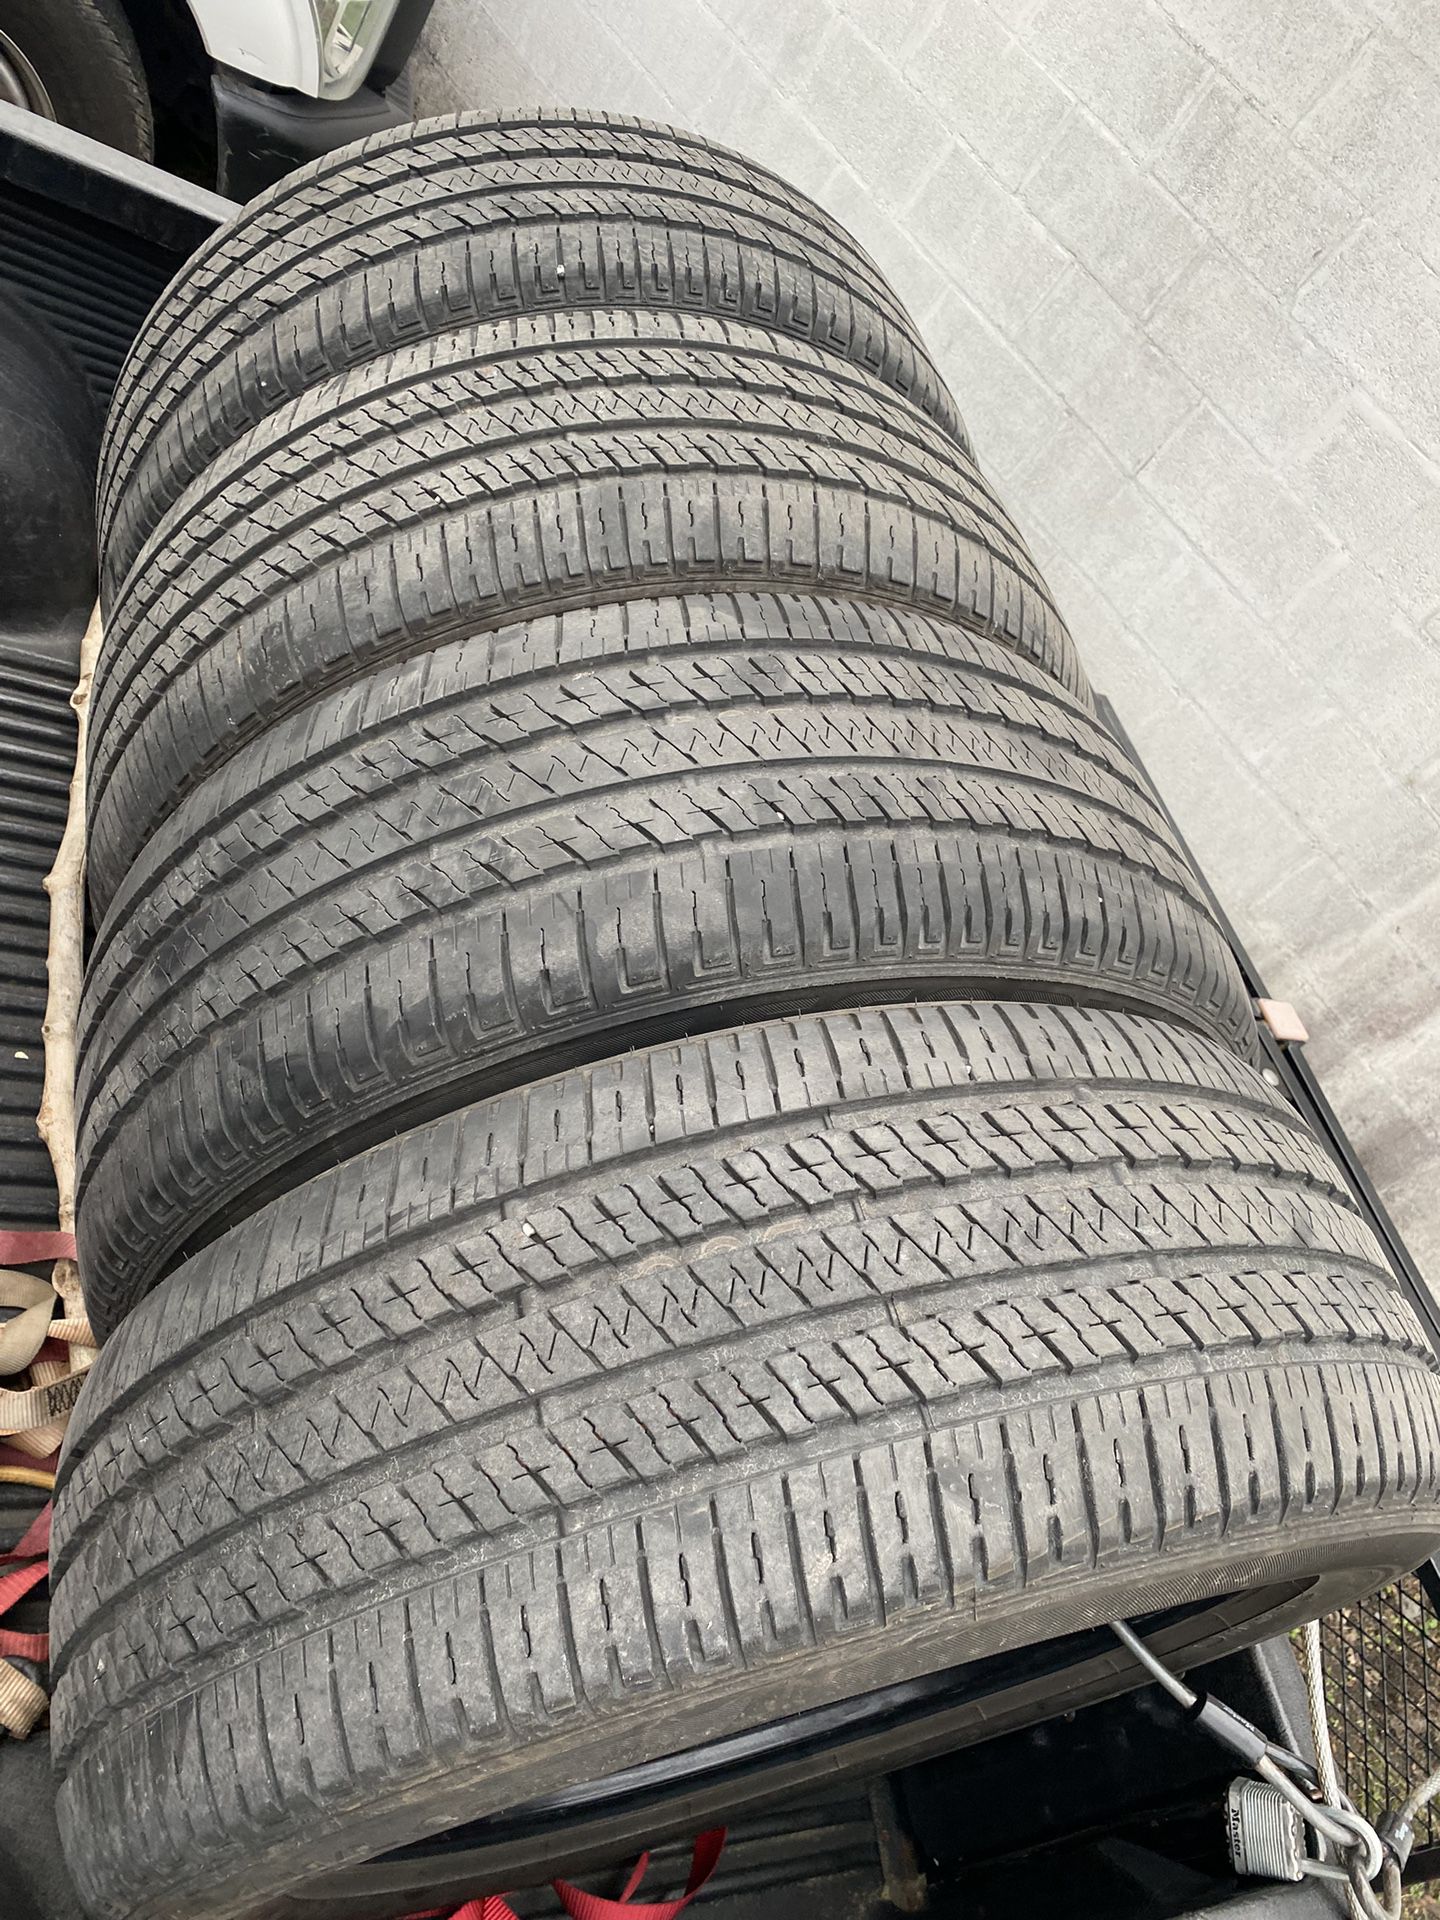 4) 265/50/20 Bridgestone Ecopia HL422 Plus Tires  Came off a 2022 Jeep Cherokee  DOT 1122  $395 for 4  I carry other sizes 